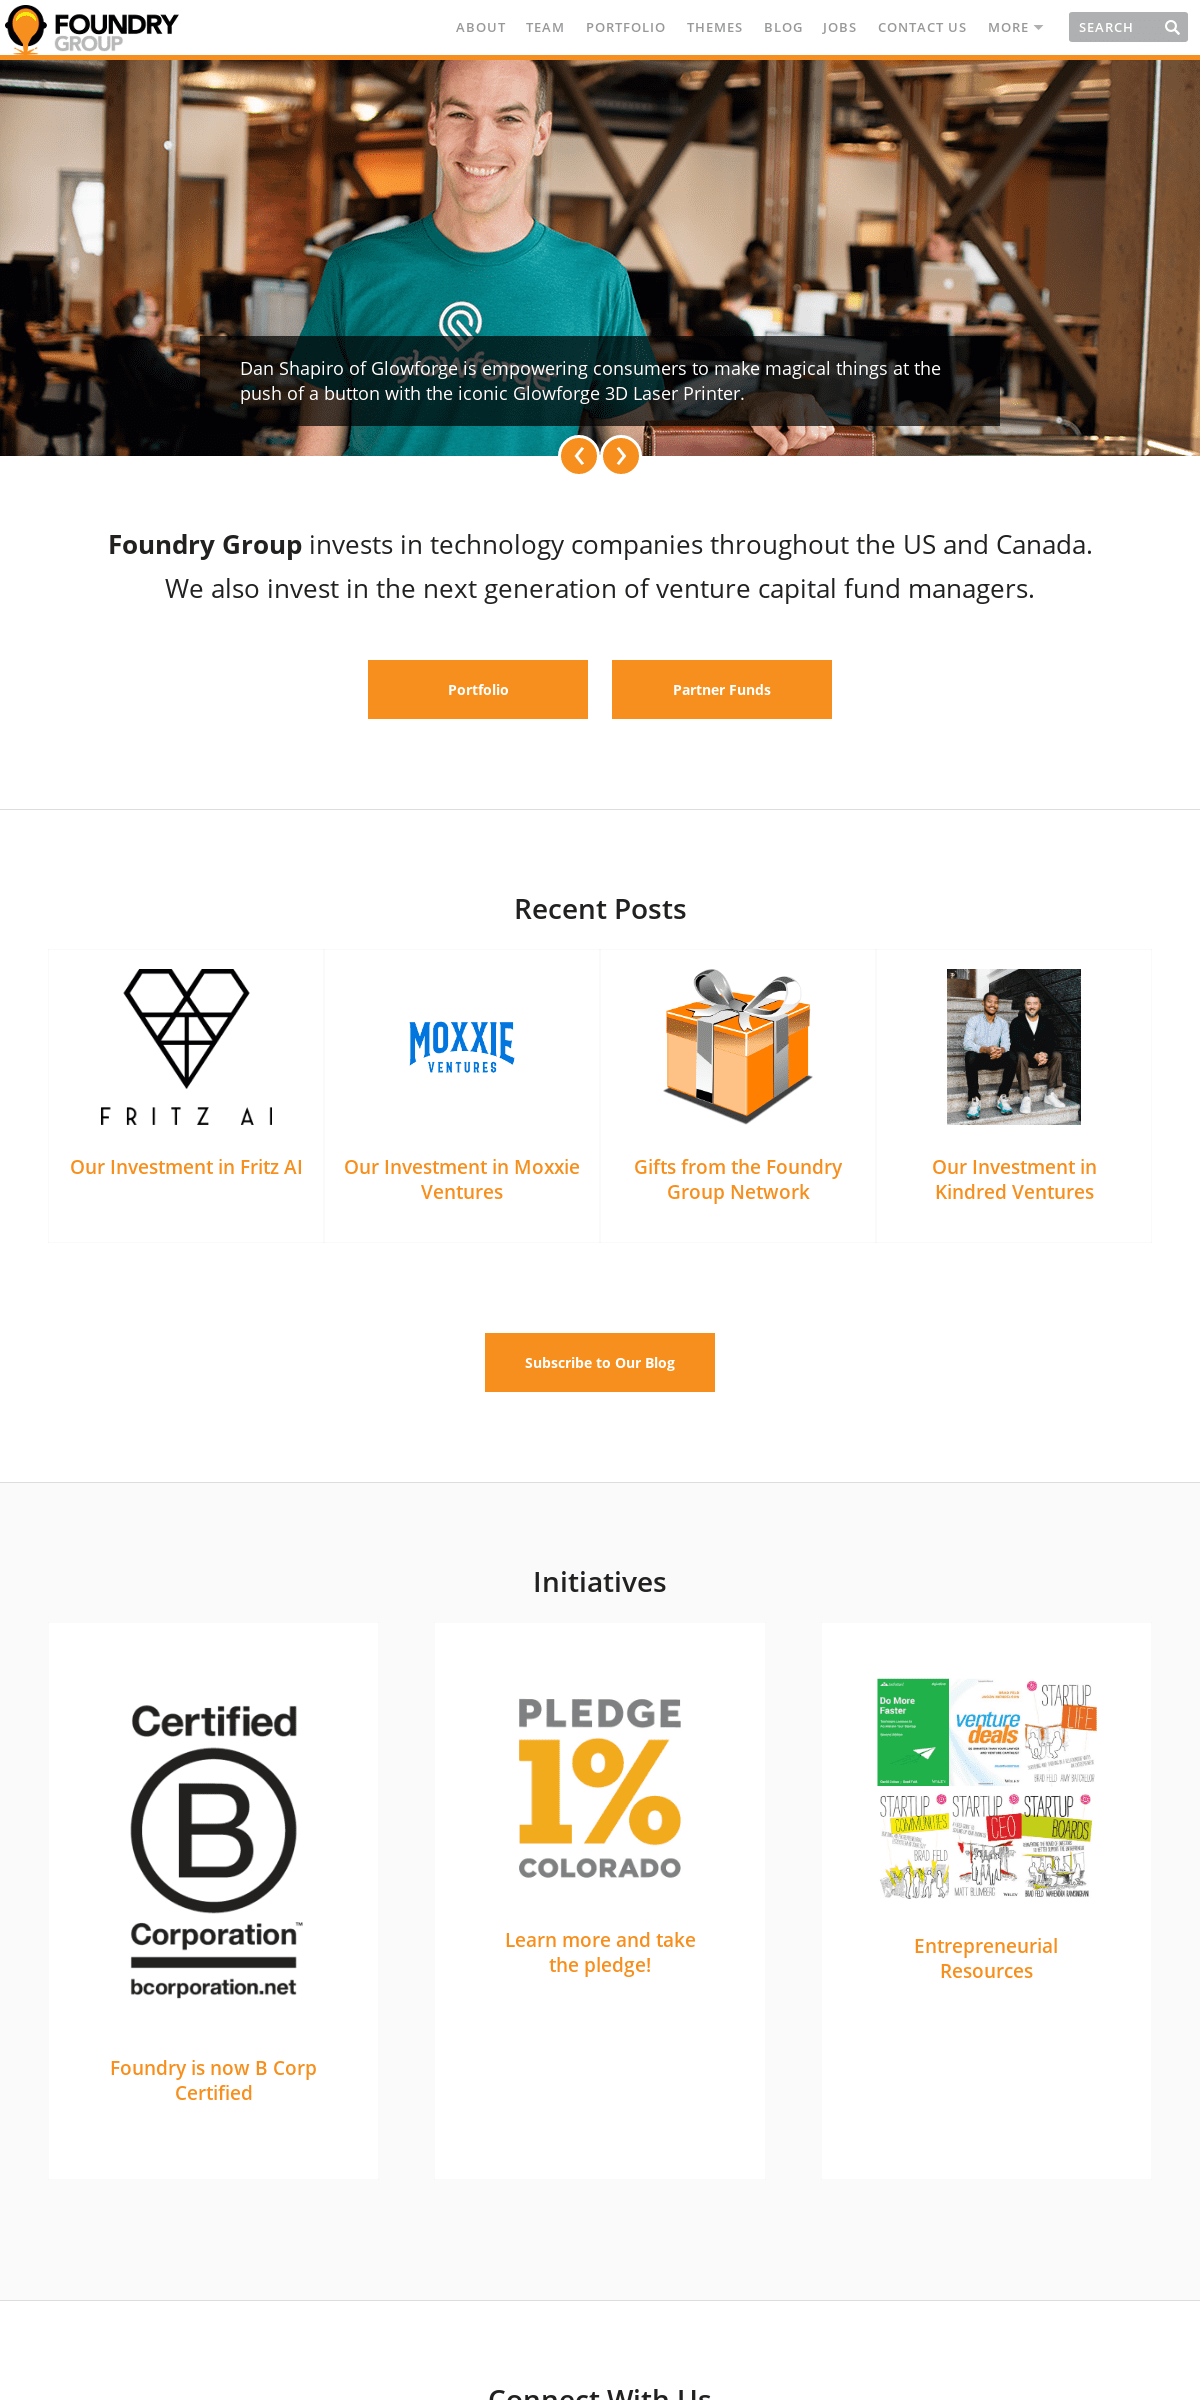 A complete backup of foundrygroup.com